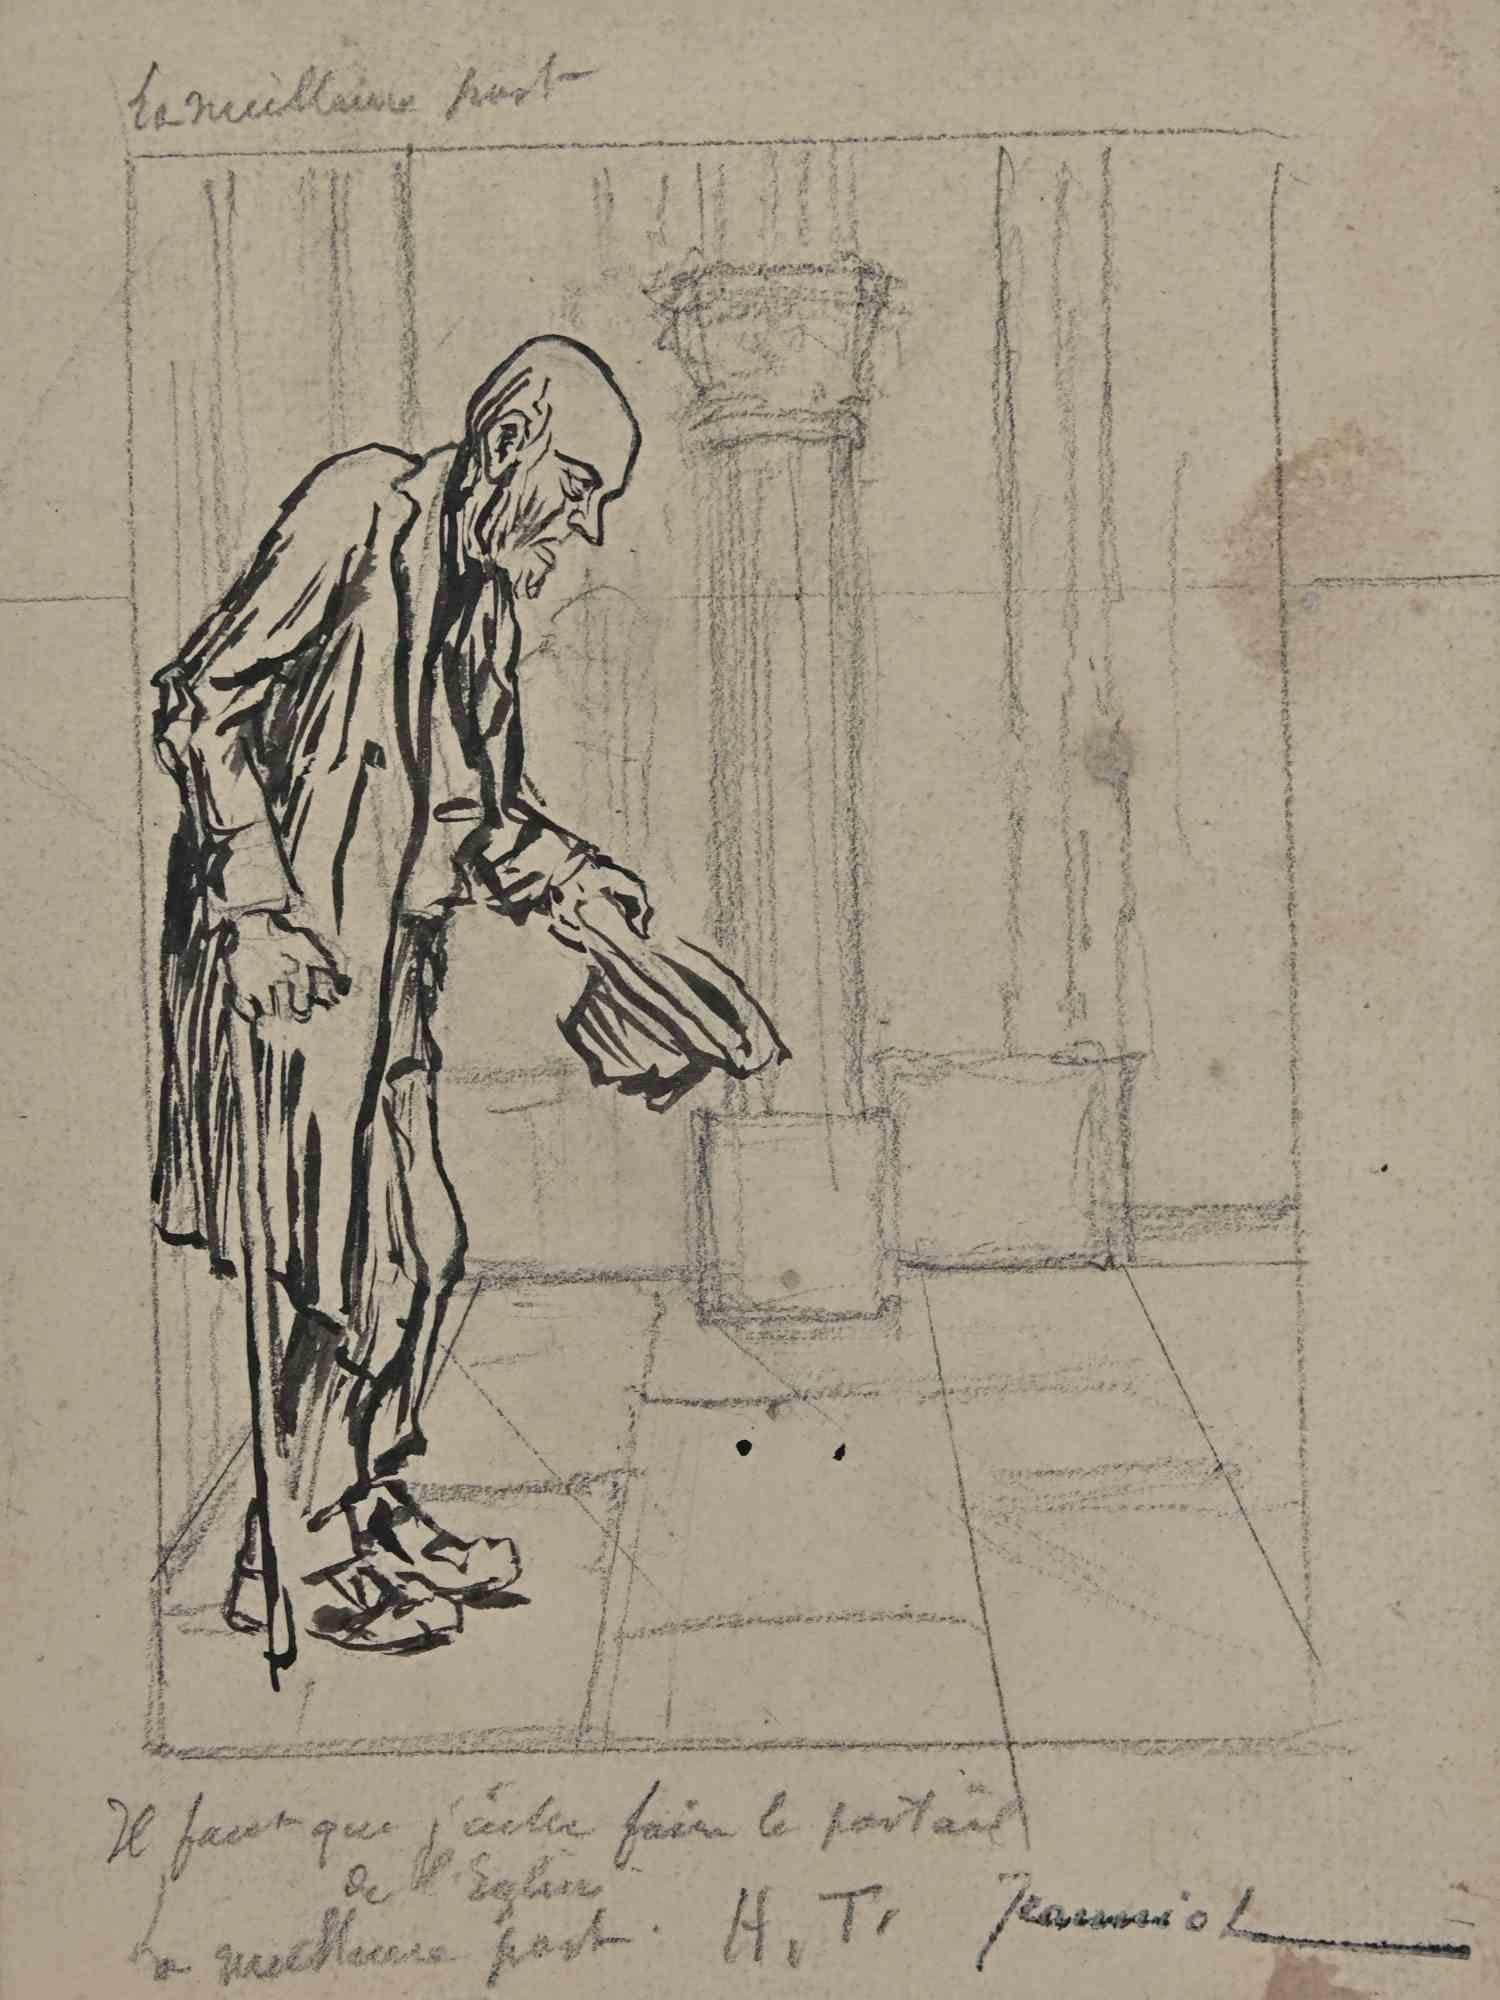 The Beggar is an original Drawing on paper realized by the painter Pierre Georges Jeanniot (1848-1934).

Drawing in Pencil and china ink.

Hand-signed on the lower.

Good conditions except for aged margins and some stains.

The artwork is